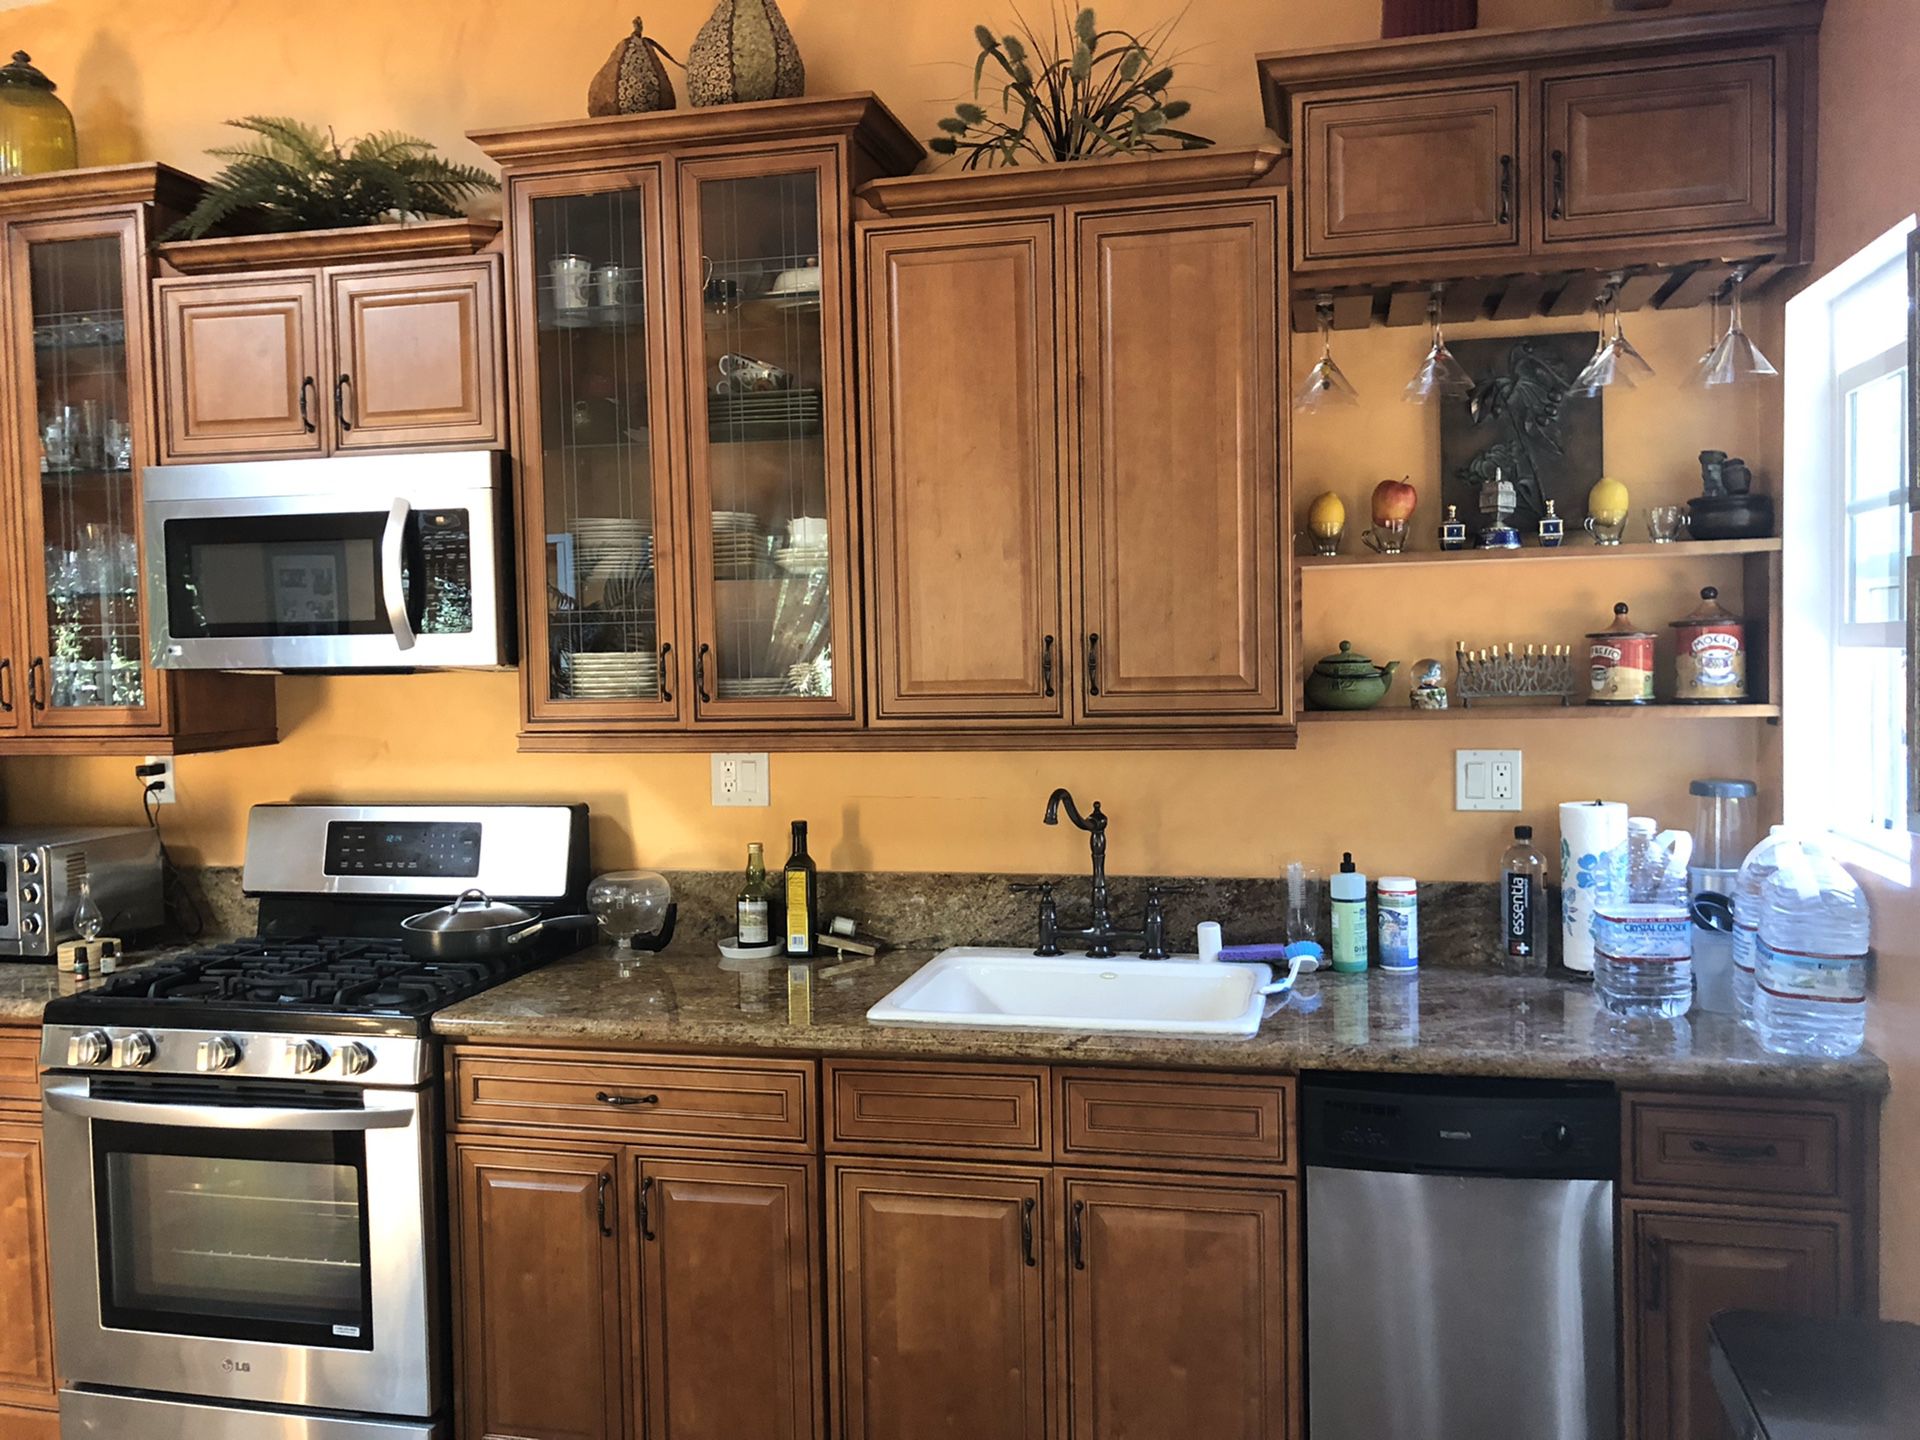 Like new kitchen cabinets, counter top, sink, faucet